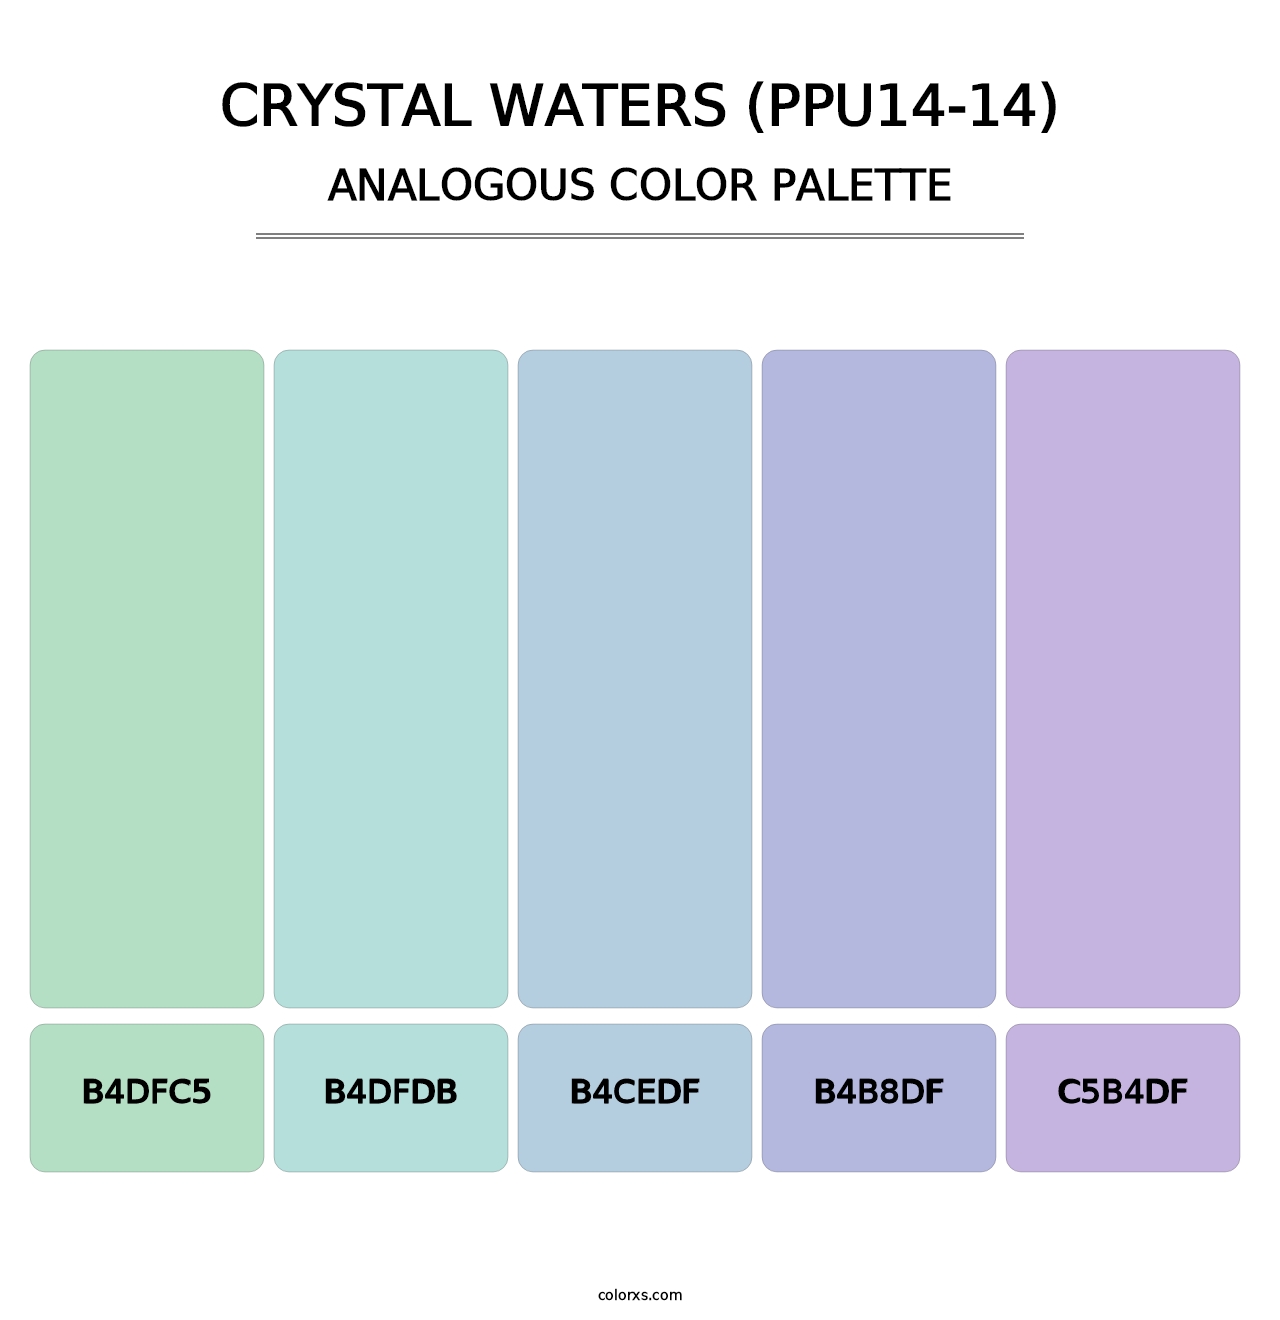 Crystal Waters (PPU14-14) - Analogous Color Palette